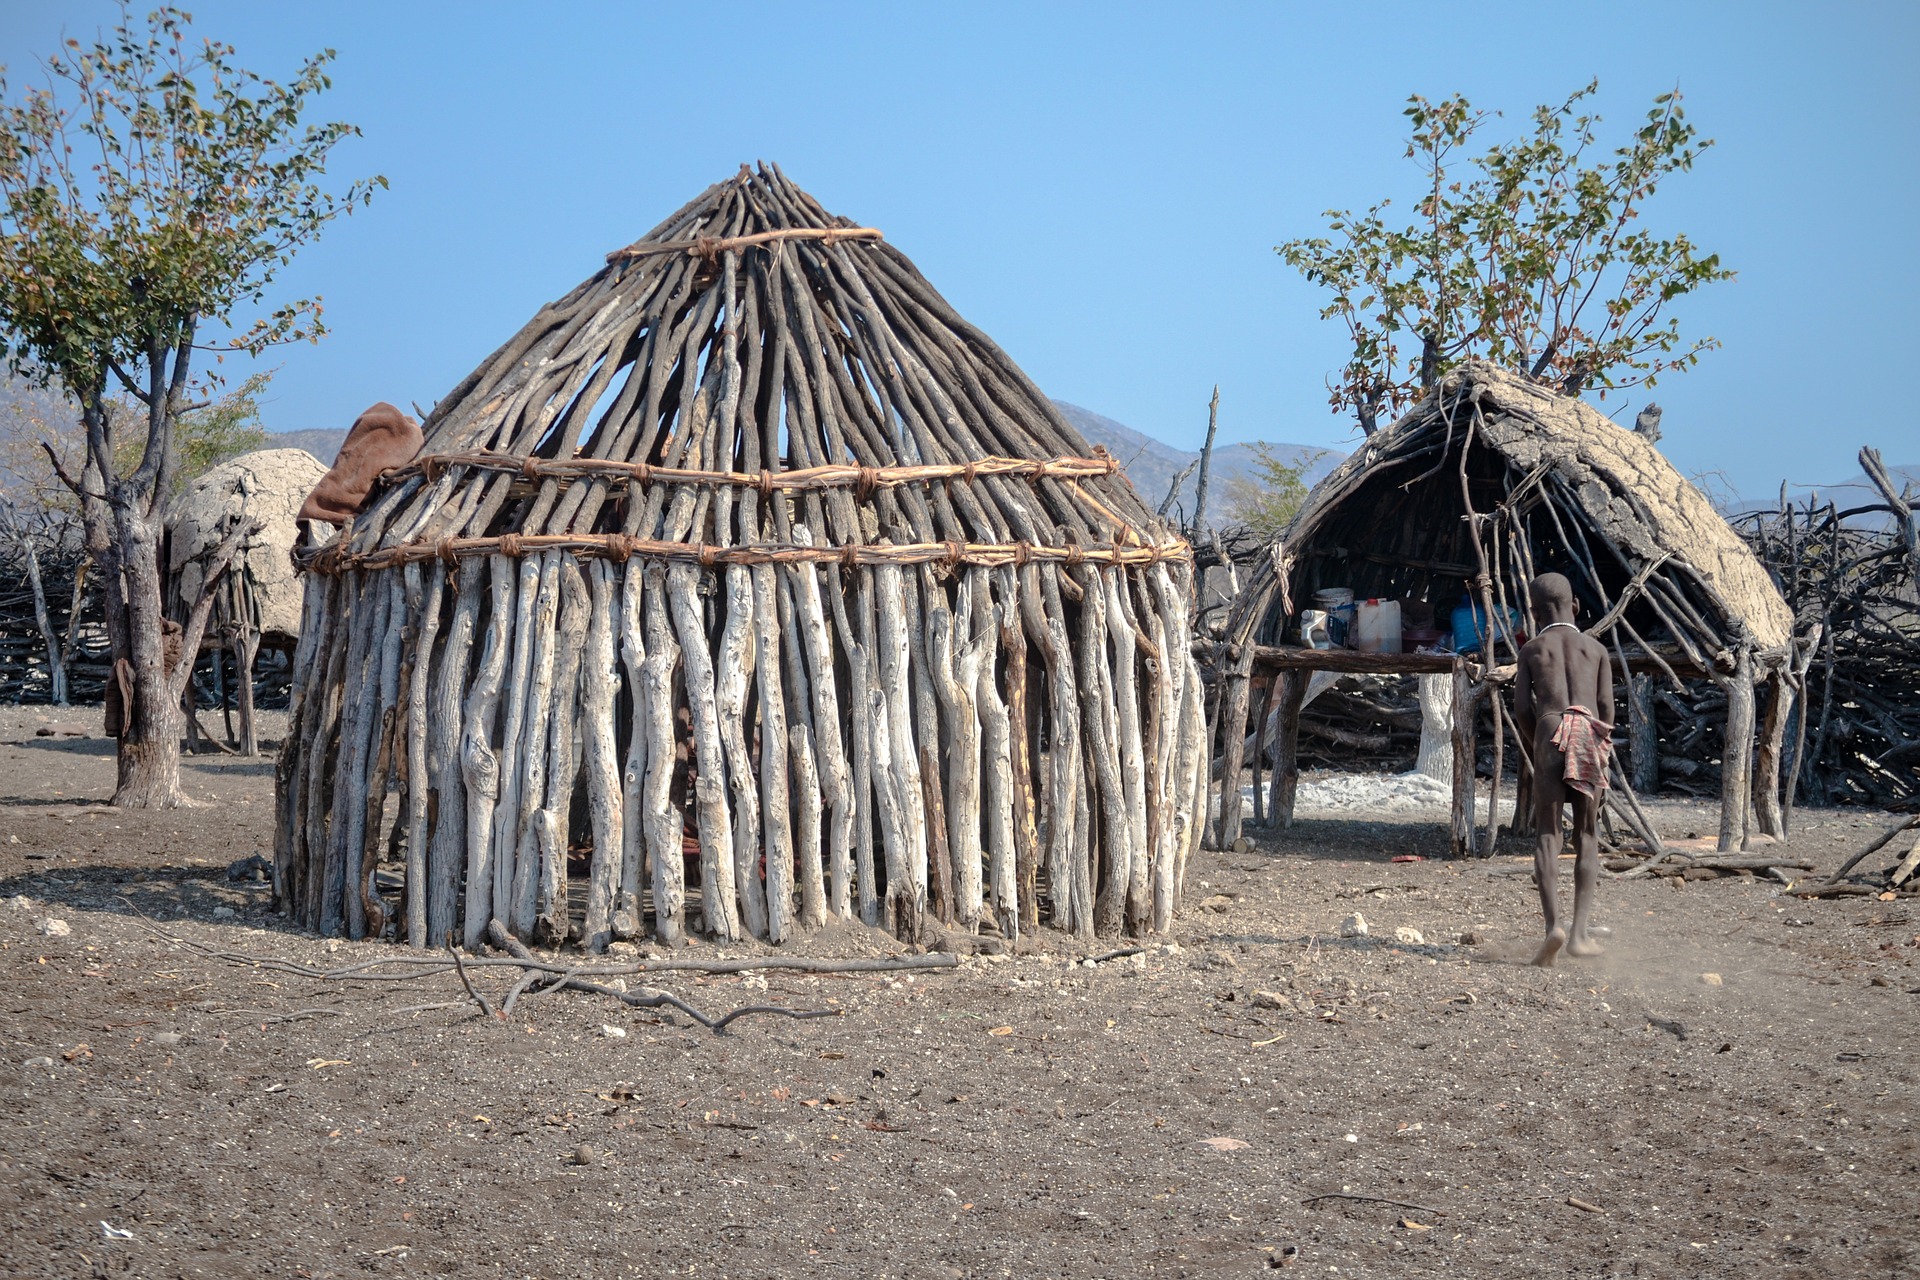 Typical housing in the Himba village.